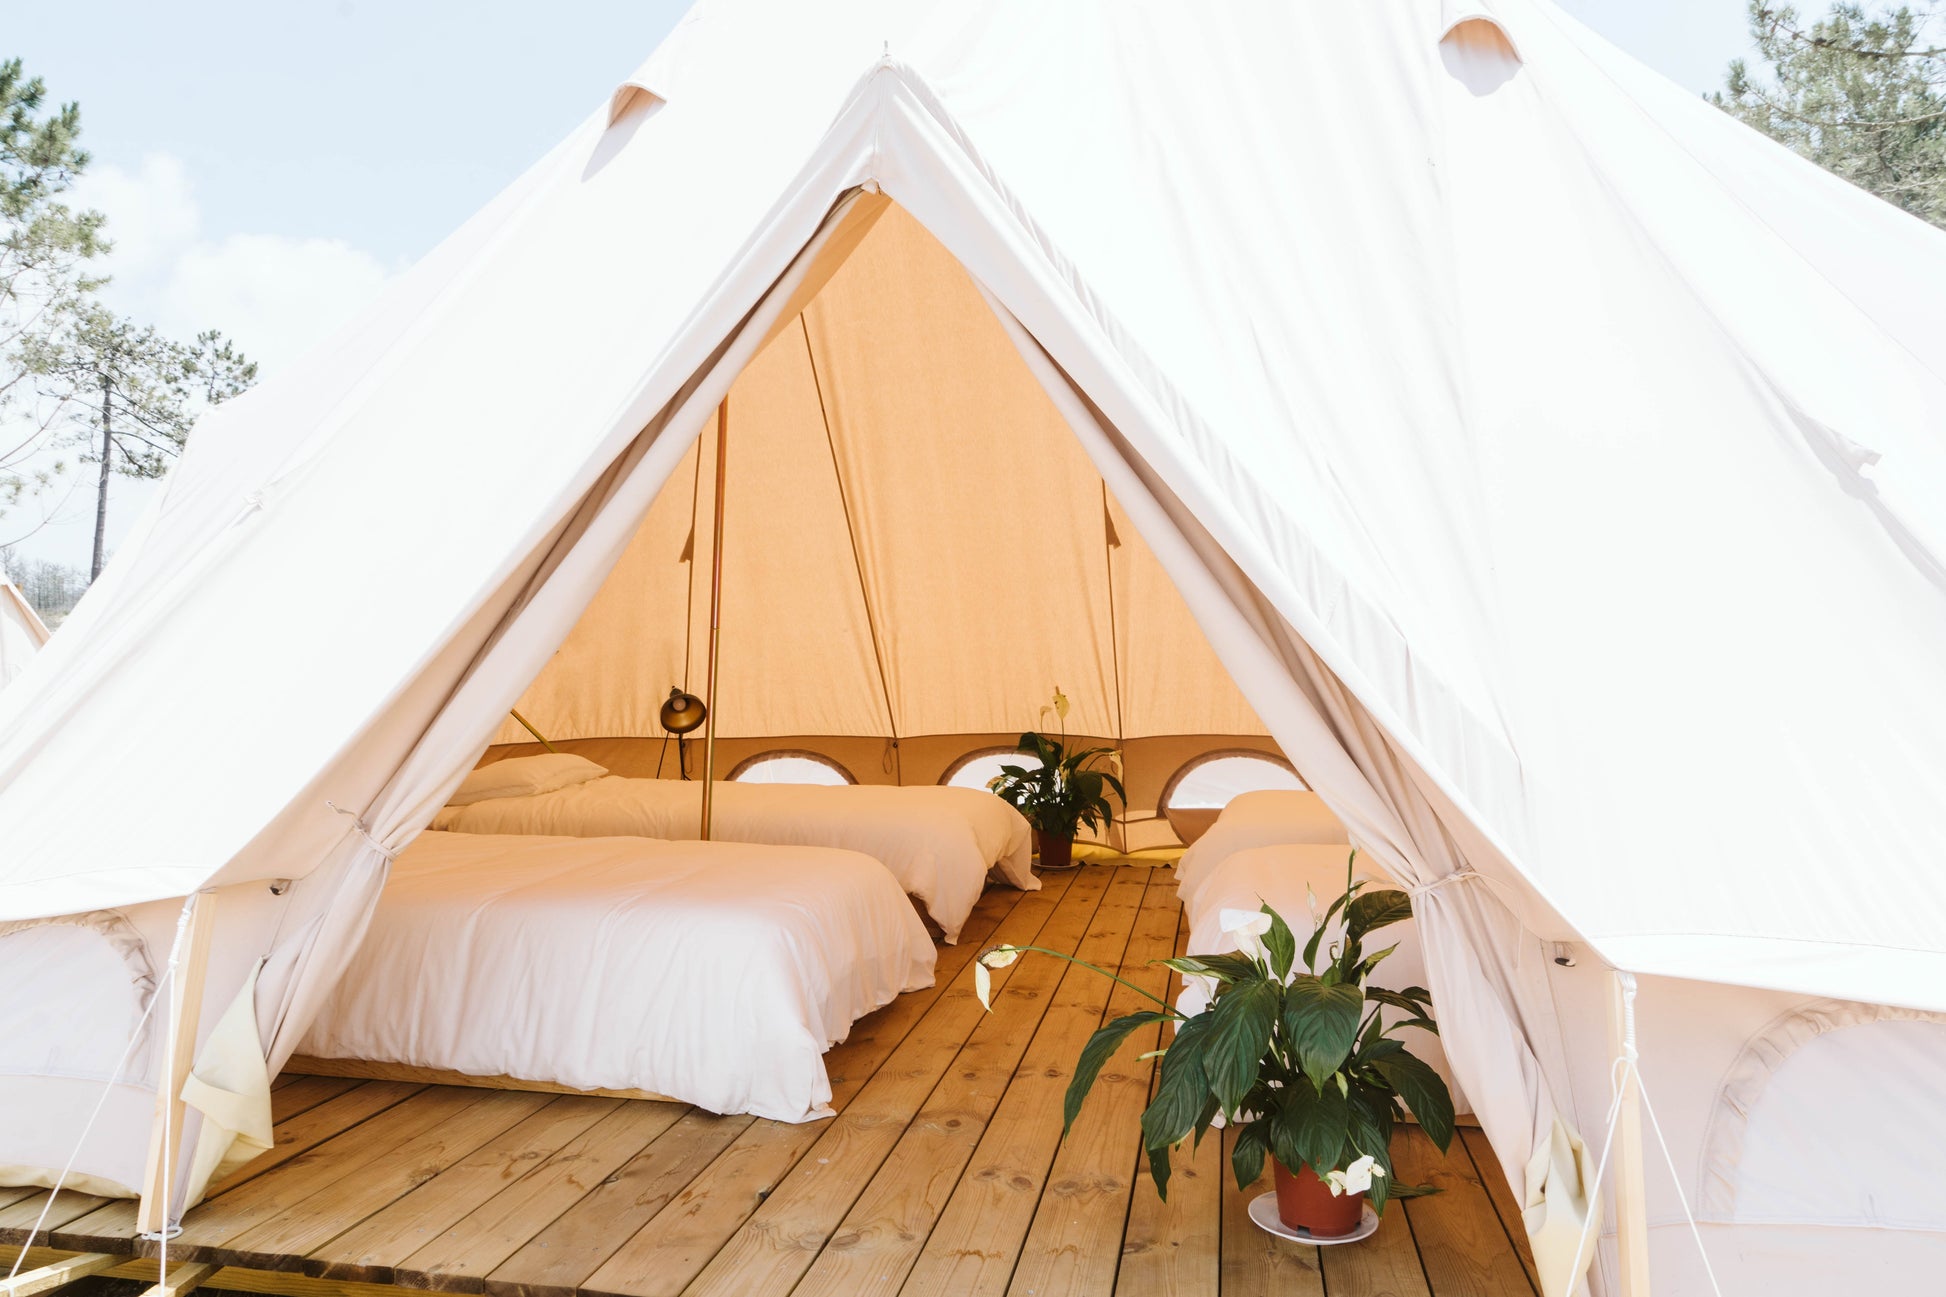 Four beds in a glamping tent at the Dreamsurf Surf Accommodation for small group travel in Portugal.